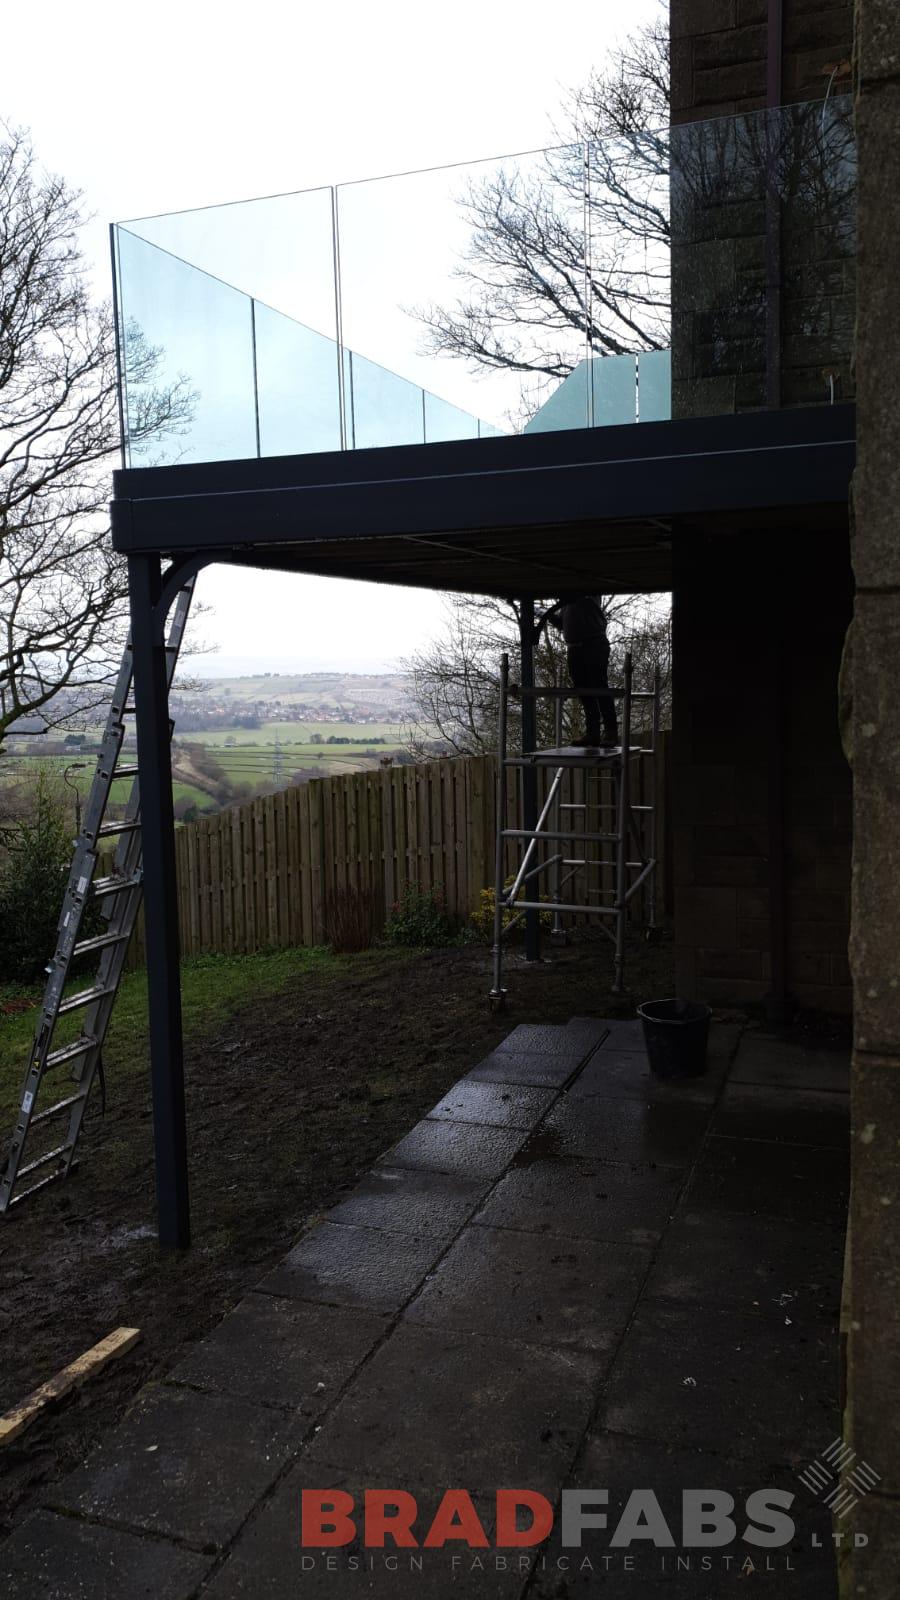 mild steel channel system balustrade with infinity glass balustrade with privacy screen to one side by Bradfabs Ltd 